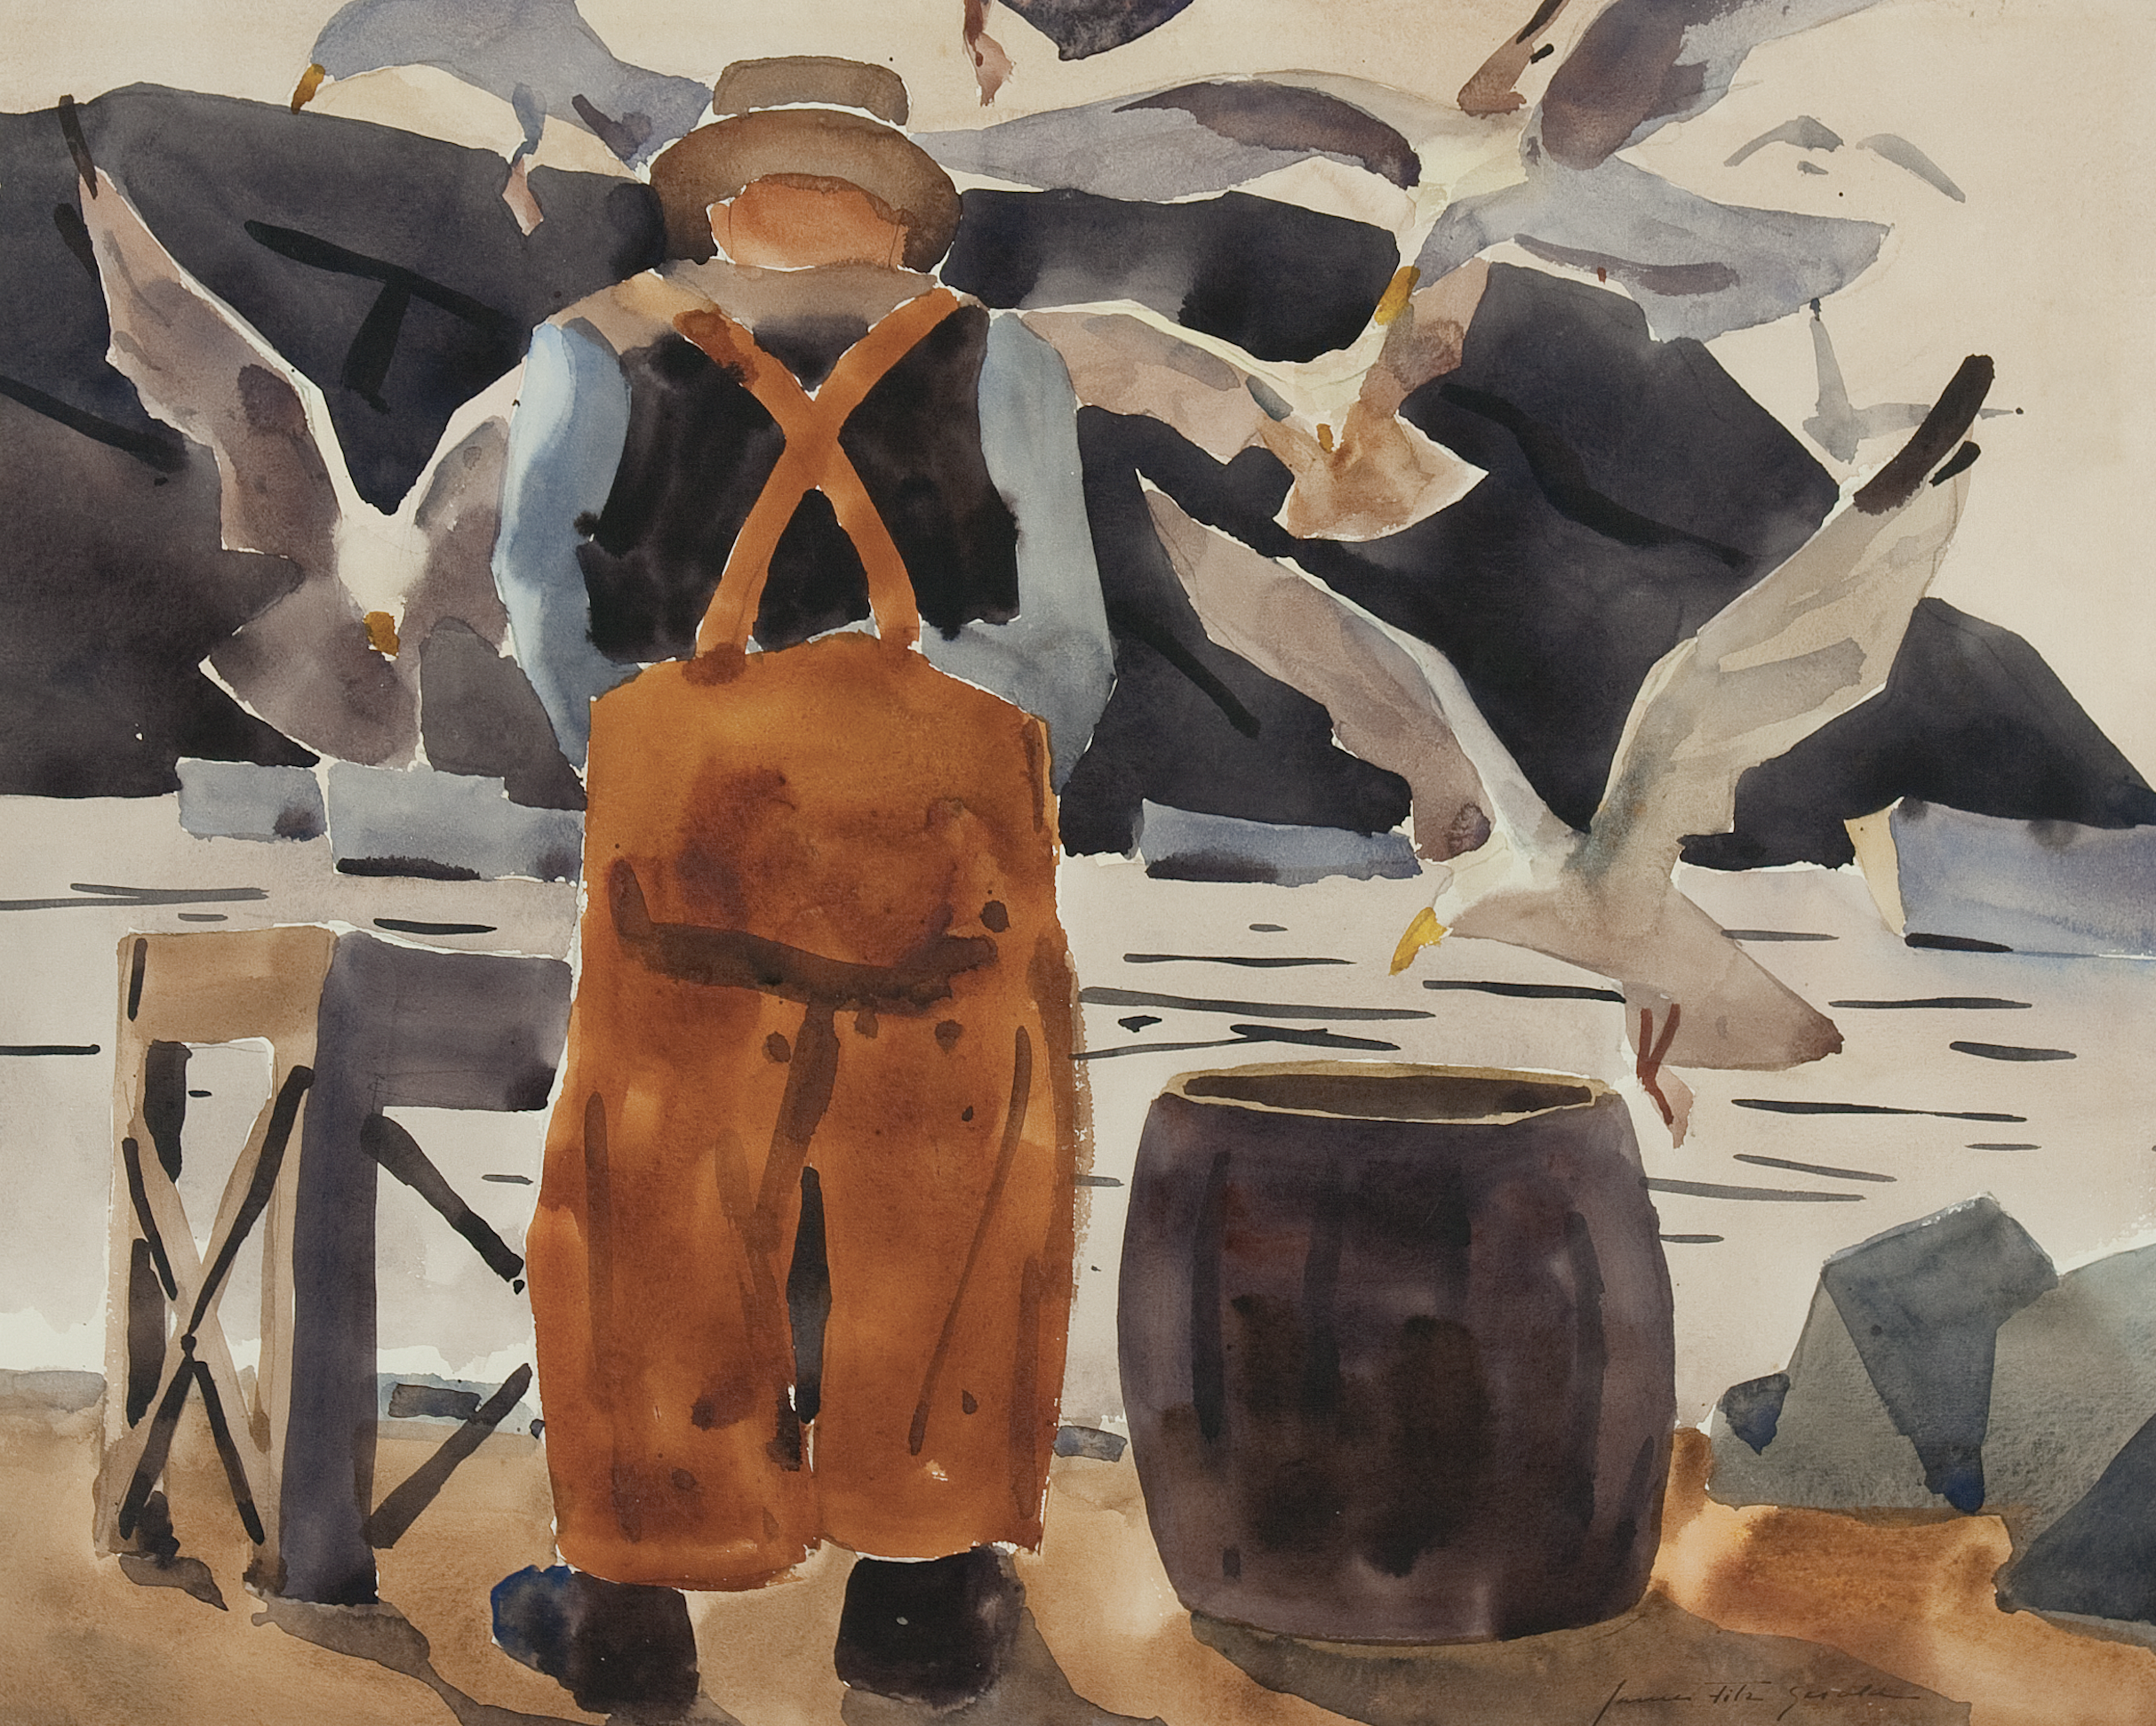 James Fitzgerald, ‘Monhegan Fisherman,’ circa 1950. Watercolor on paper, 18-3/4 by 23-1/4 in., James Fitzgerald Legacy, MMA&H